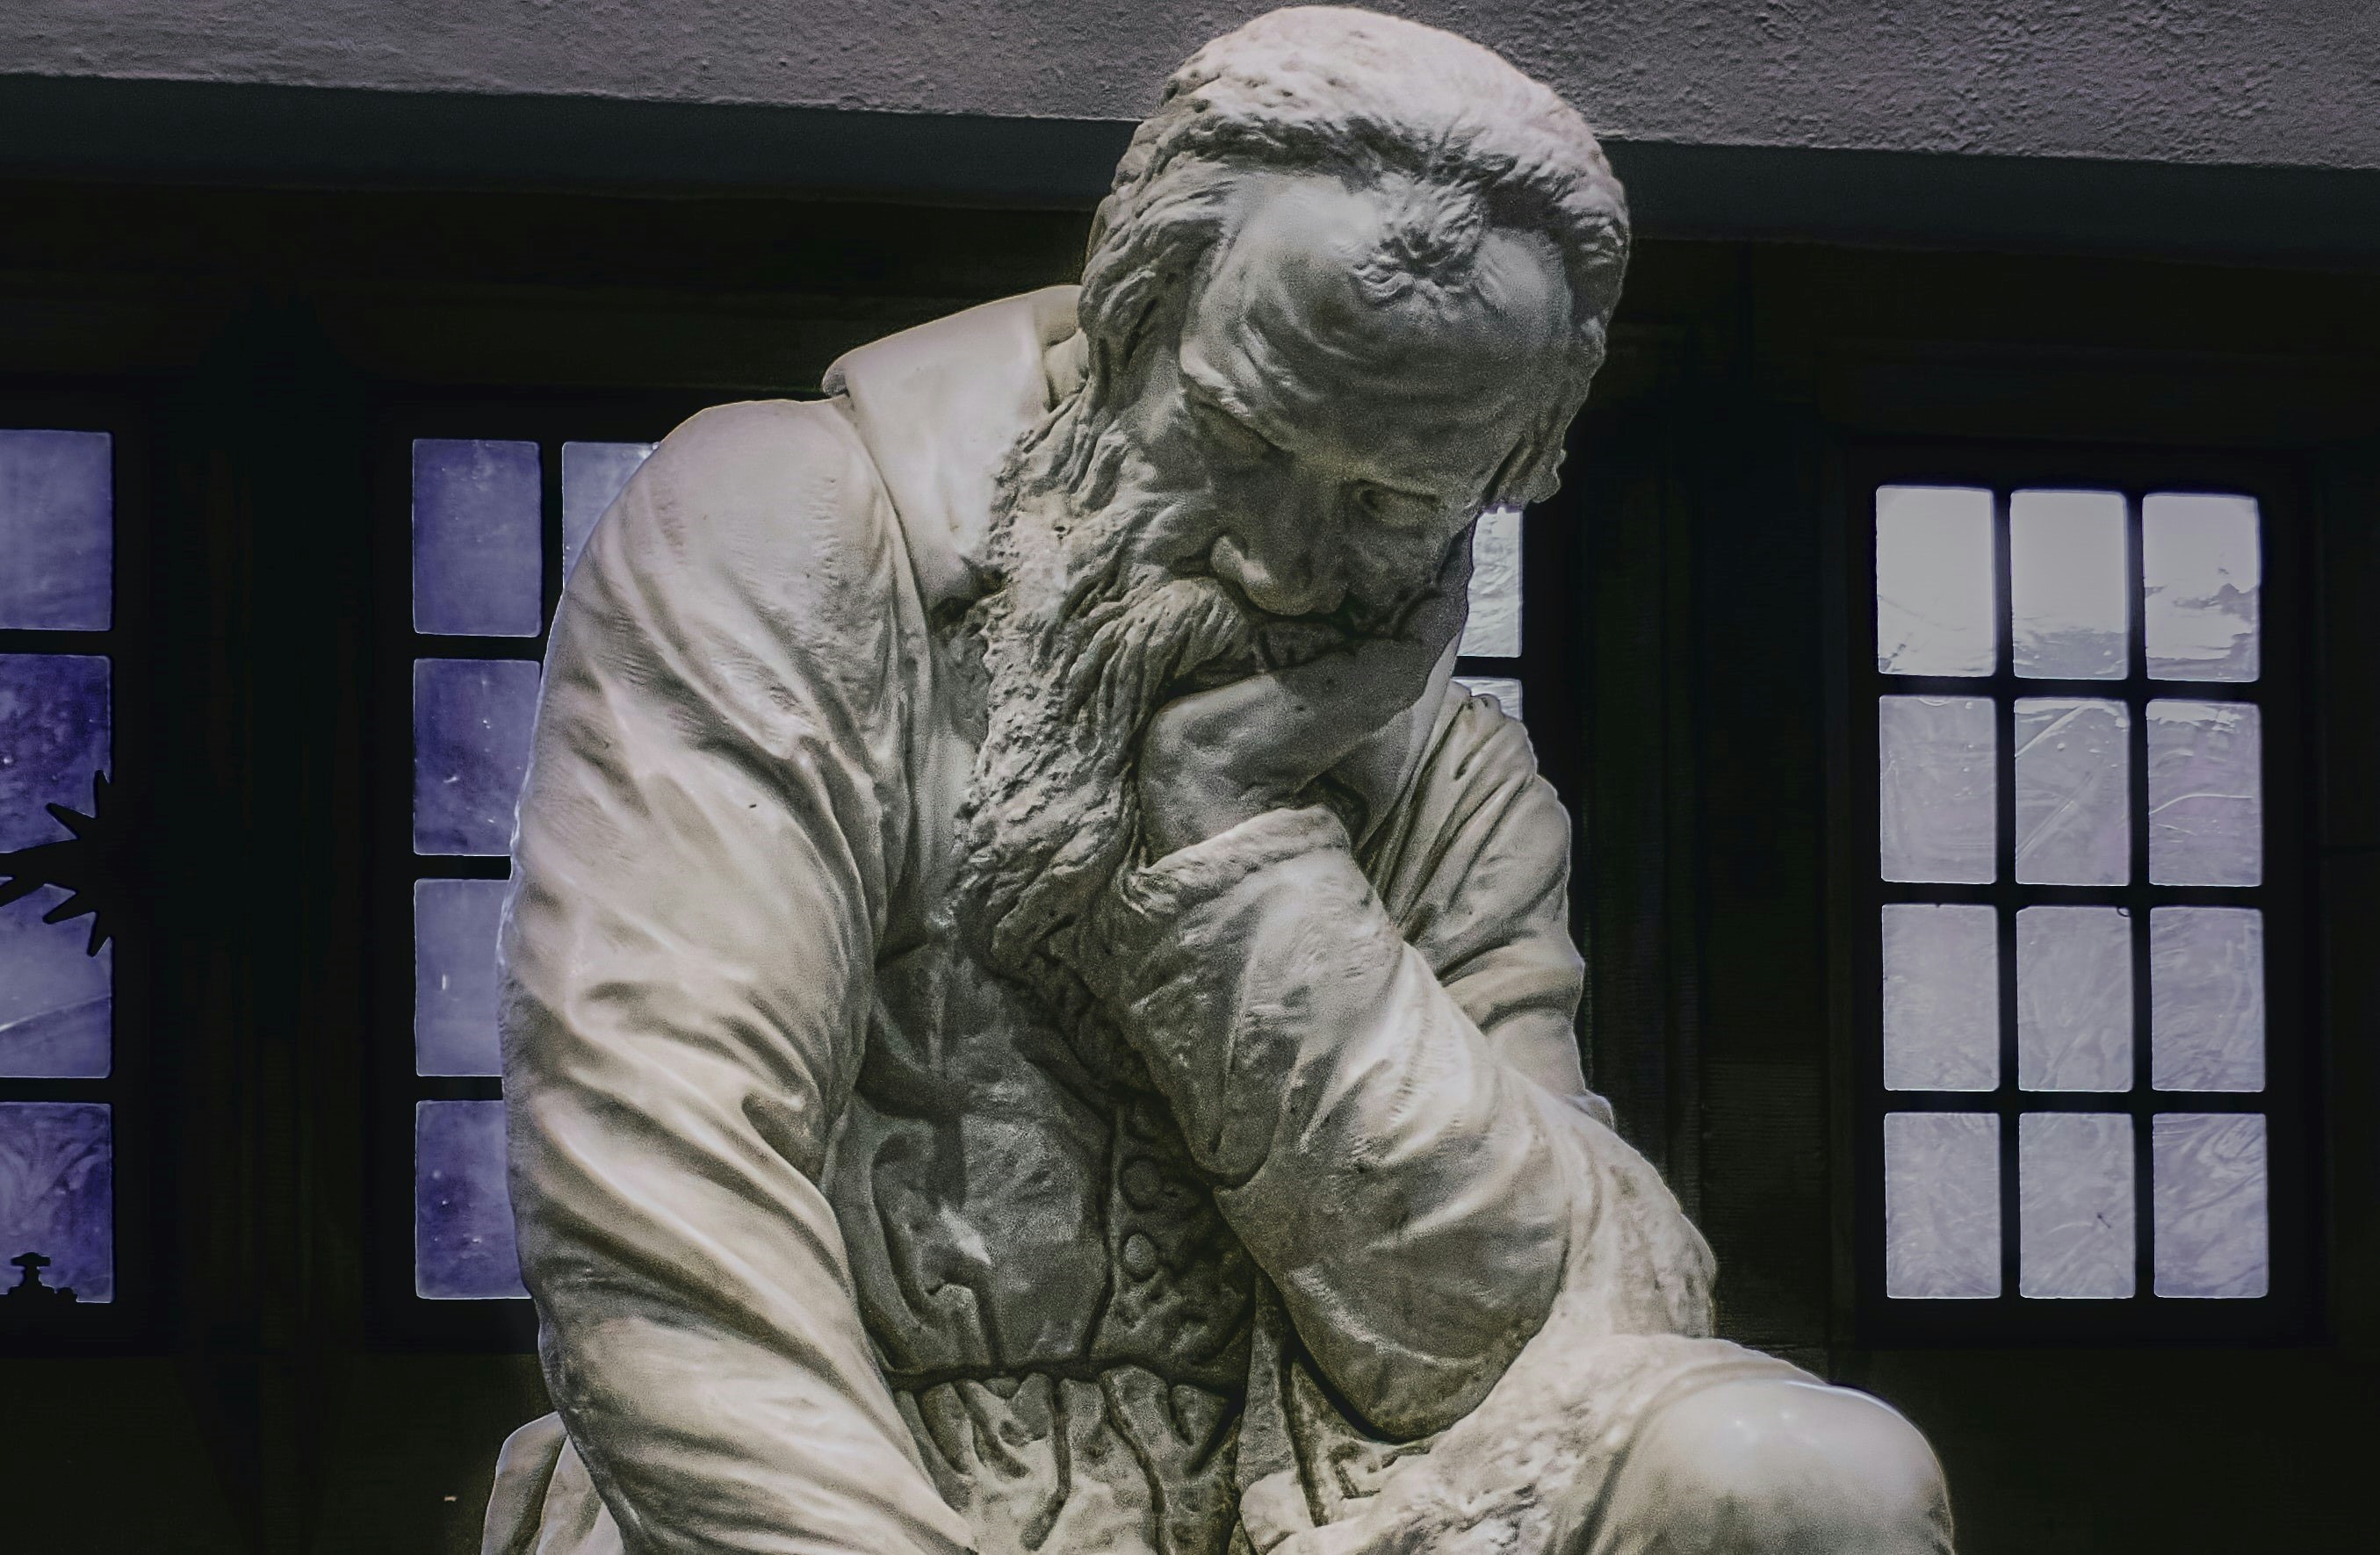 Marble sculpture of Galileo Galilei contemplating the nature of the universe (Nov., 2019).